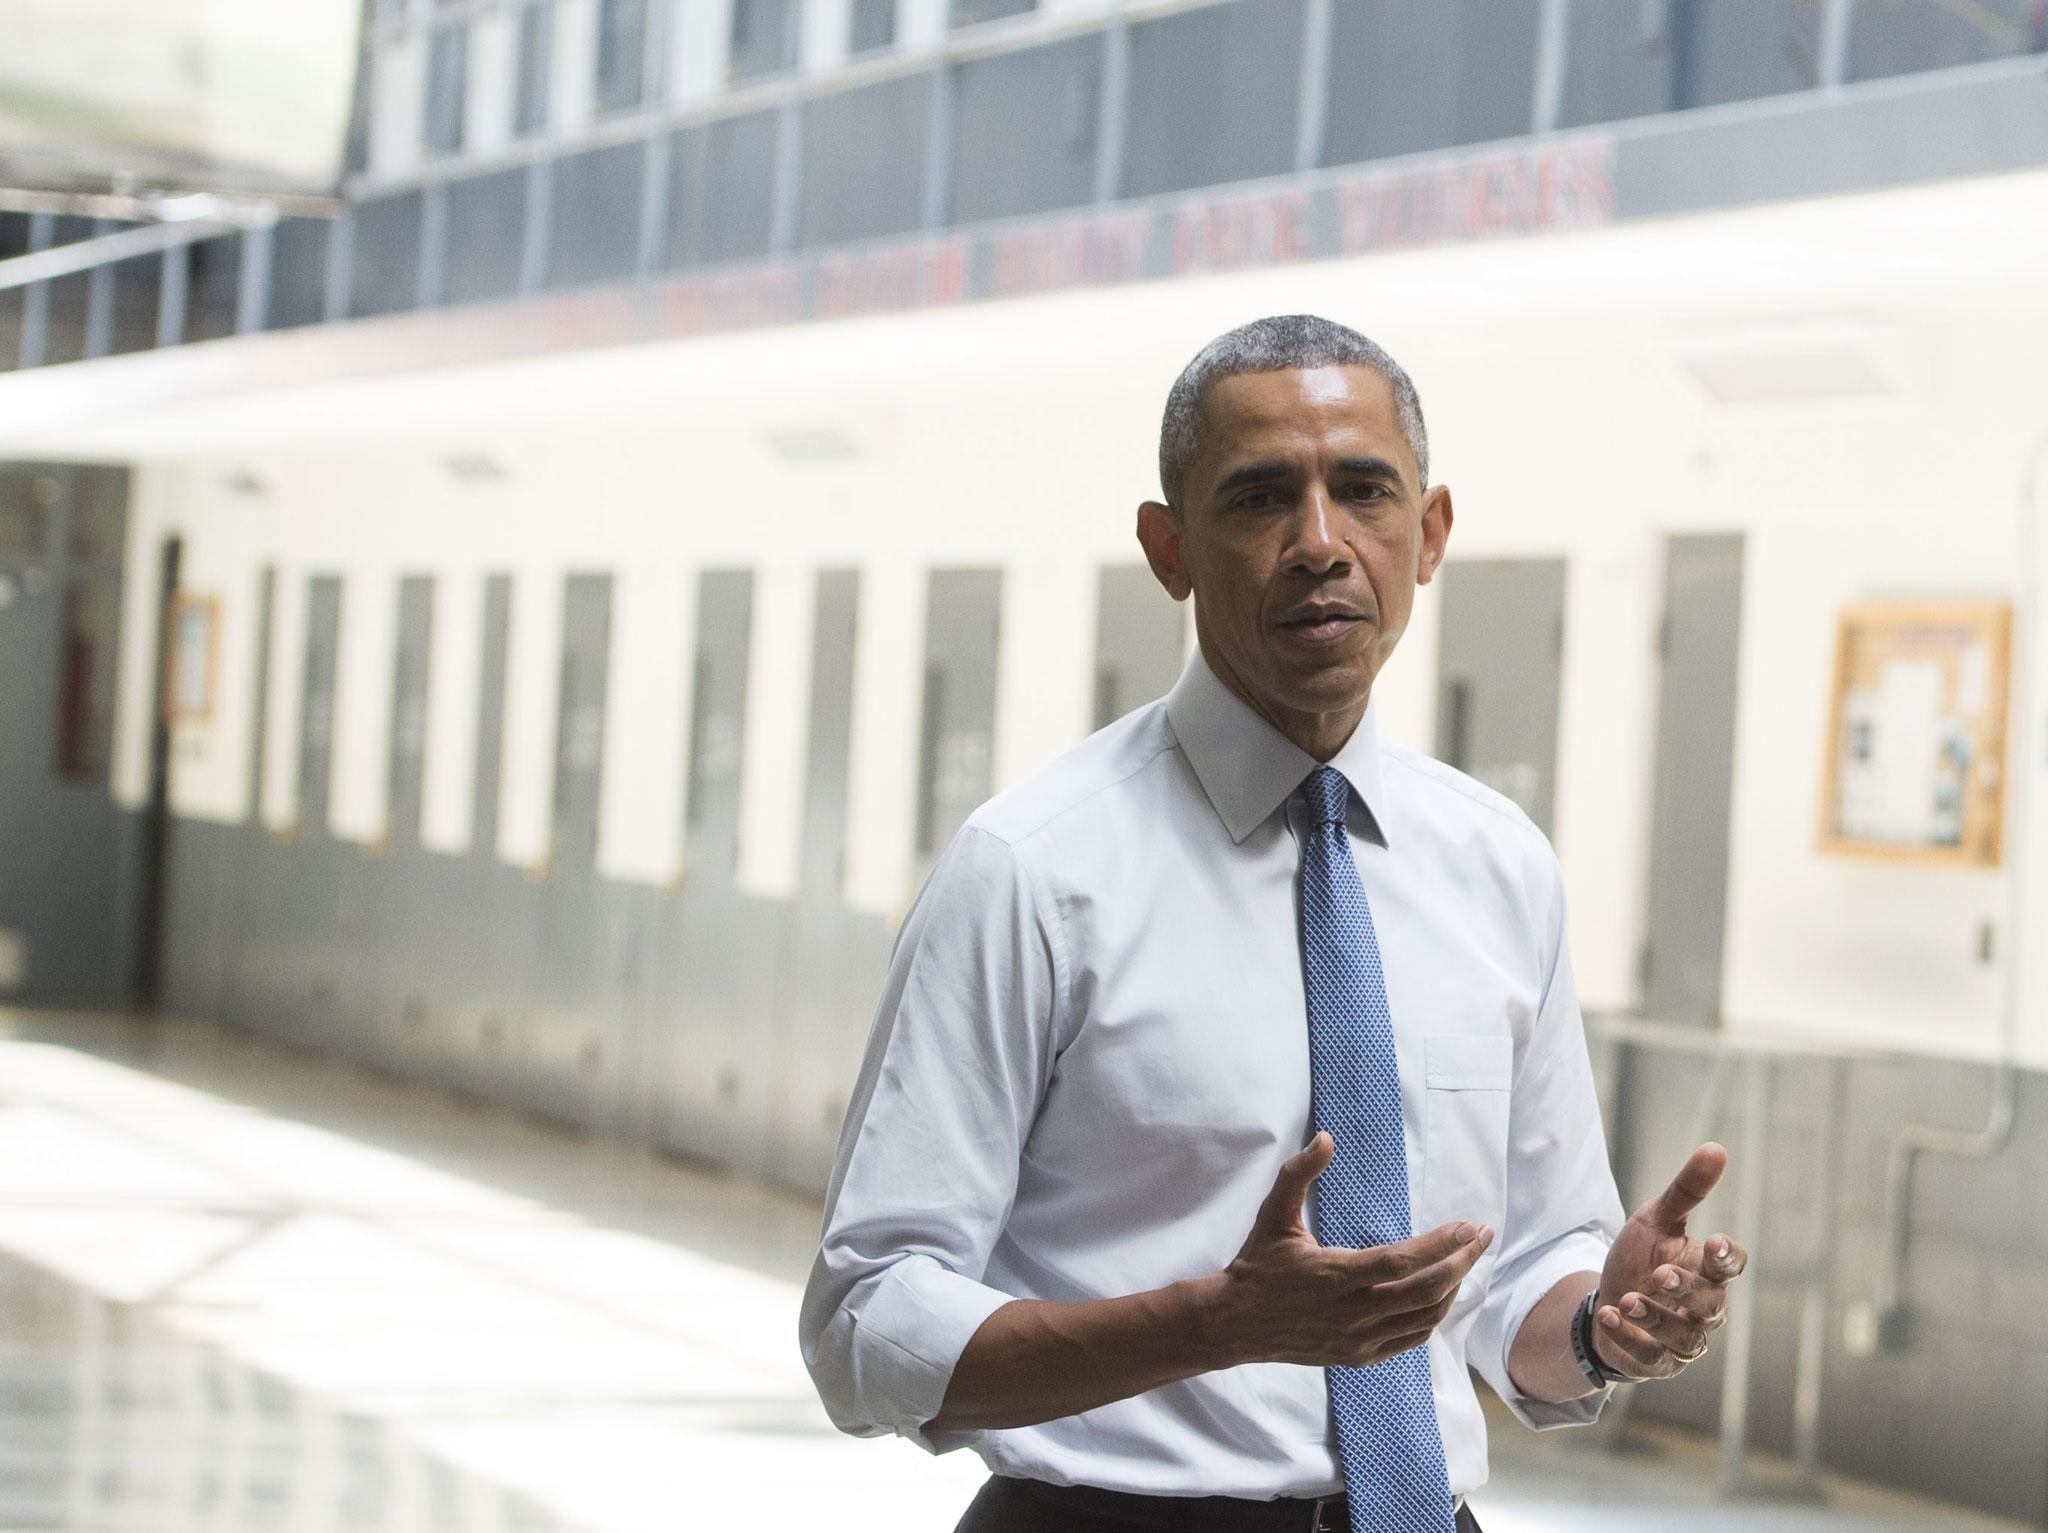 Obama speaks to reporters during a tour of an Oklahoma prison in July Saul Loeb/Getty